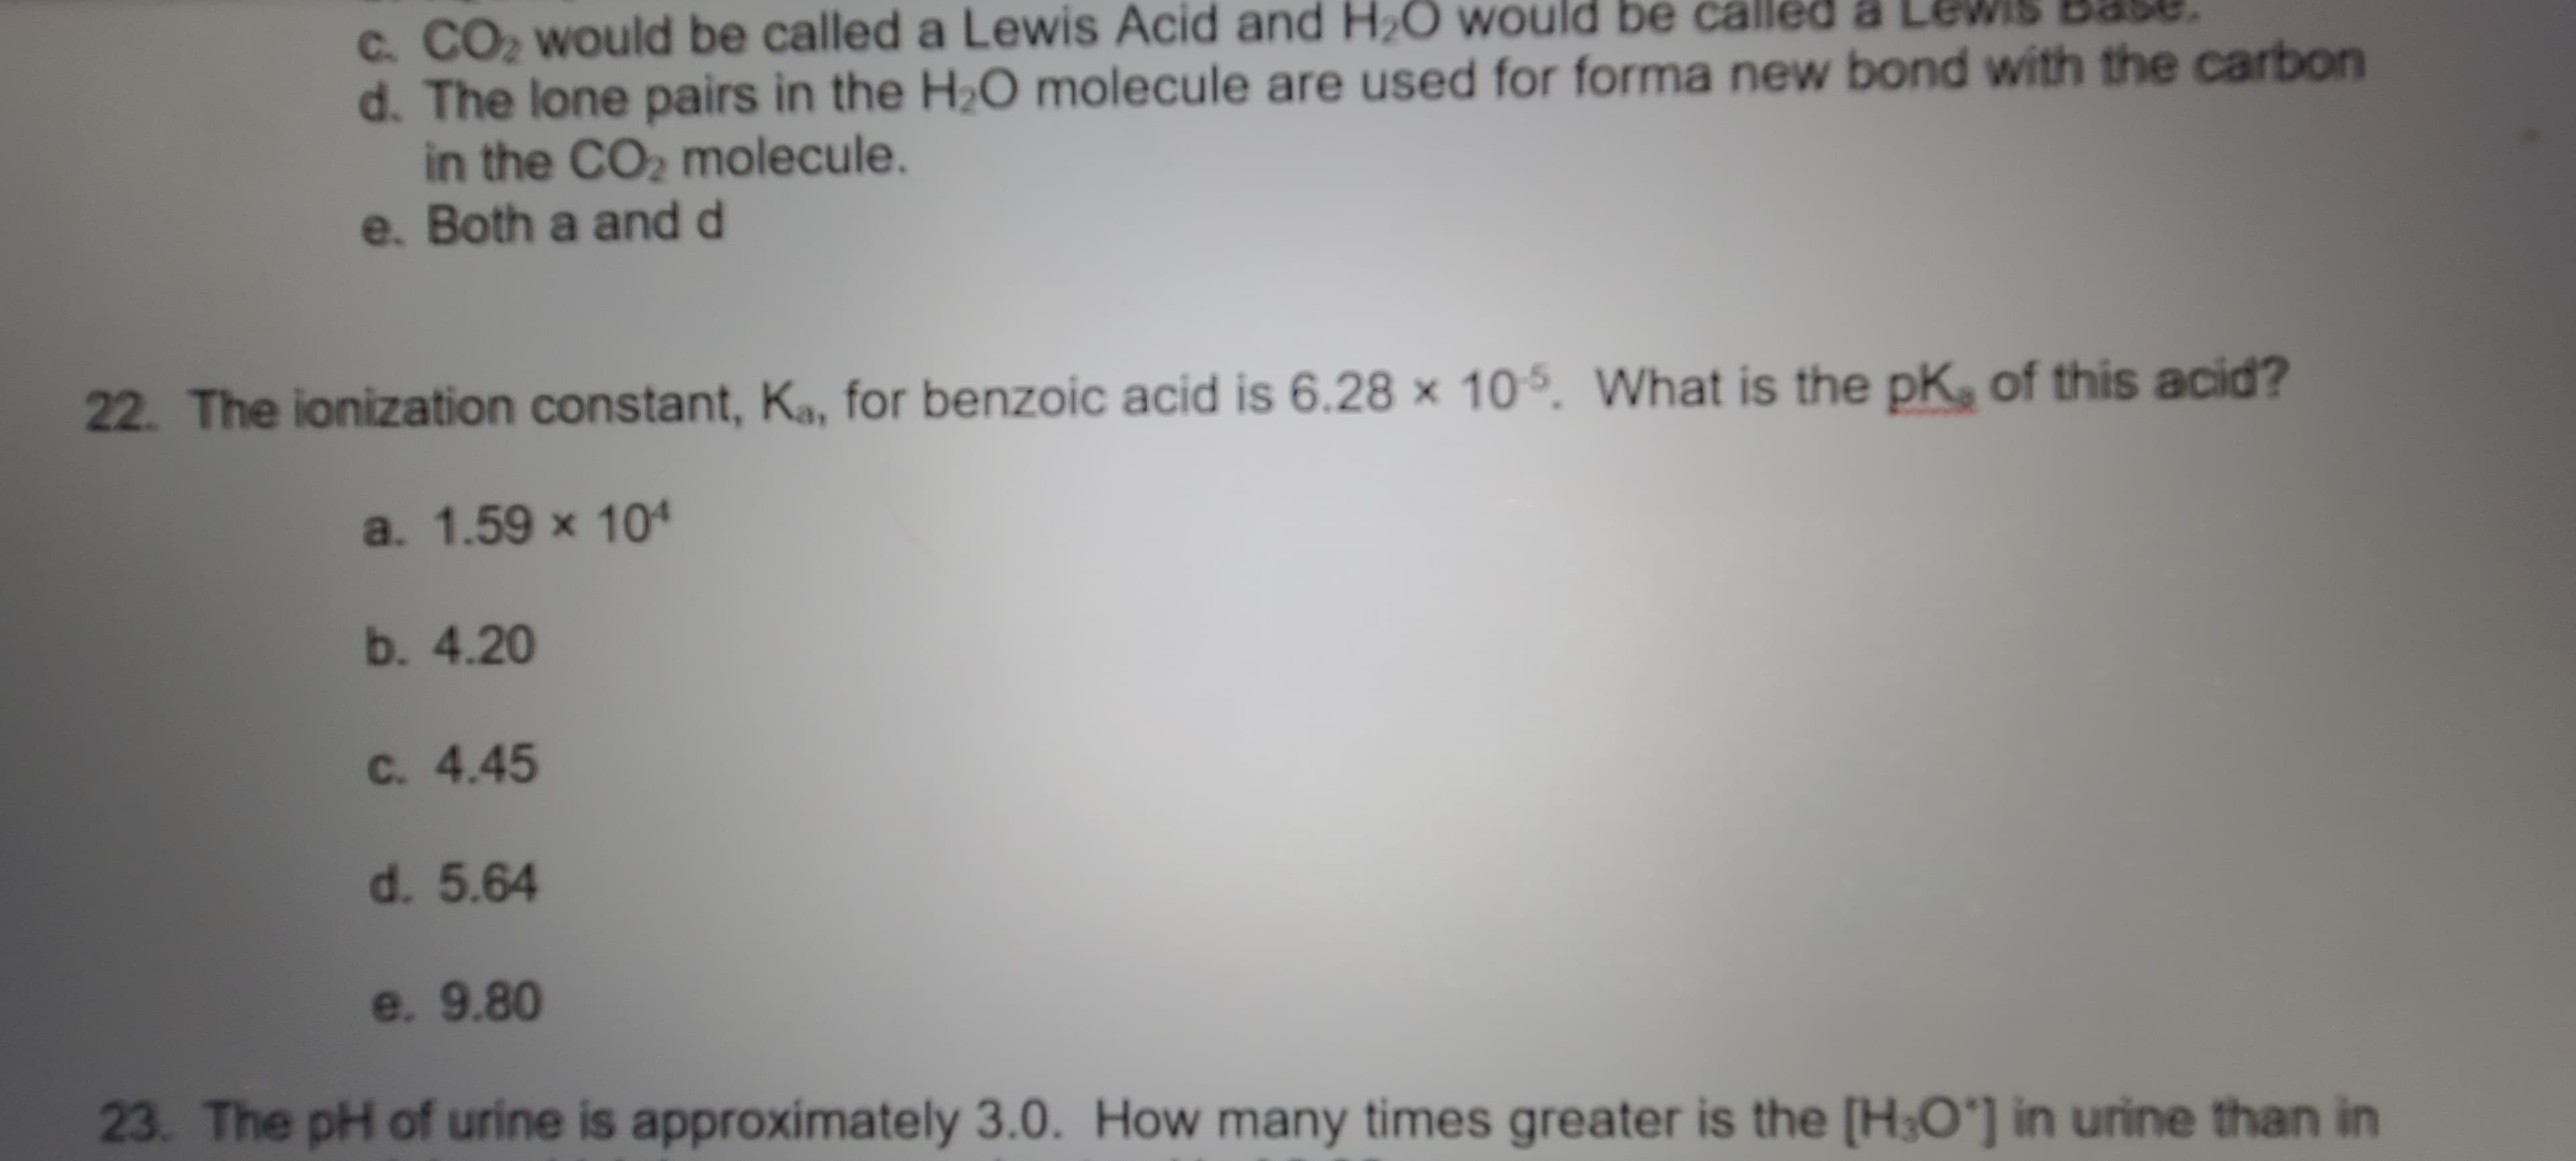 The ionization constant, Ka, for benzoic acid is 6.28 x 105. What is the pK, of this acid?
a. 1.59 x 101
b. 4.20
C. 4.45
d. 5.64
e. 9.80
